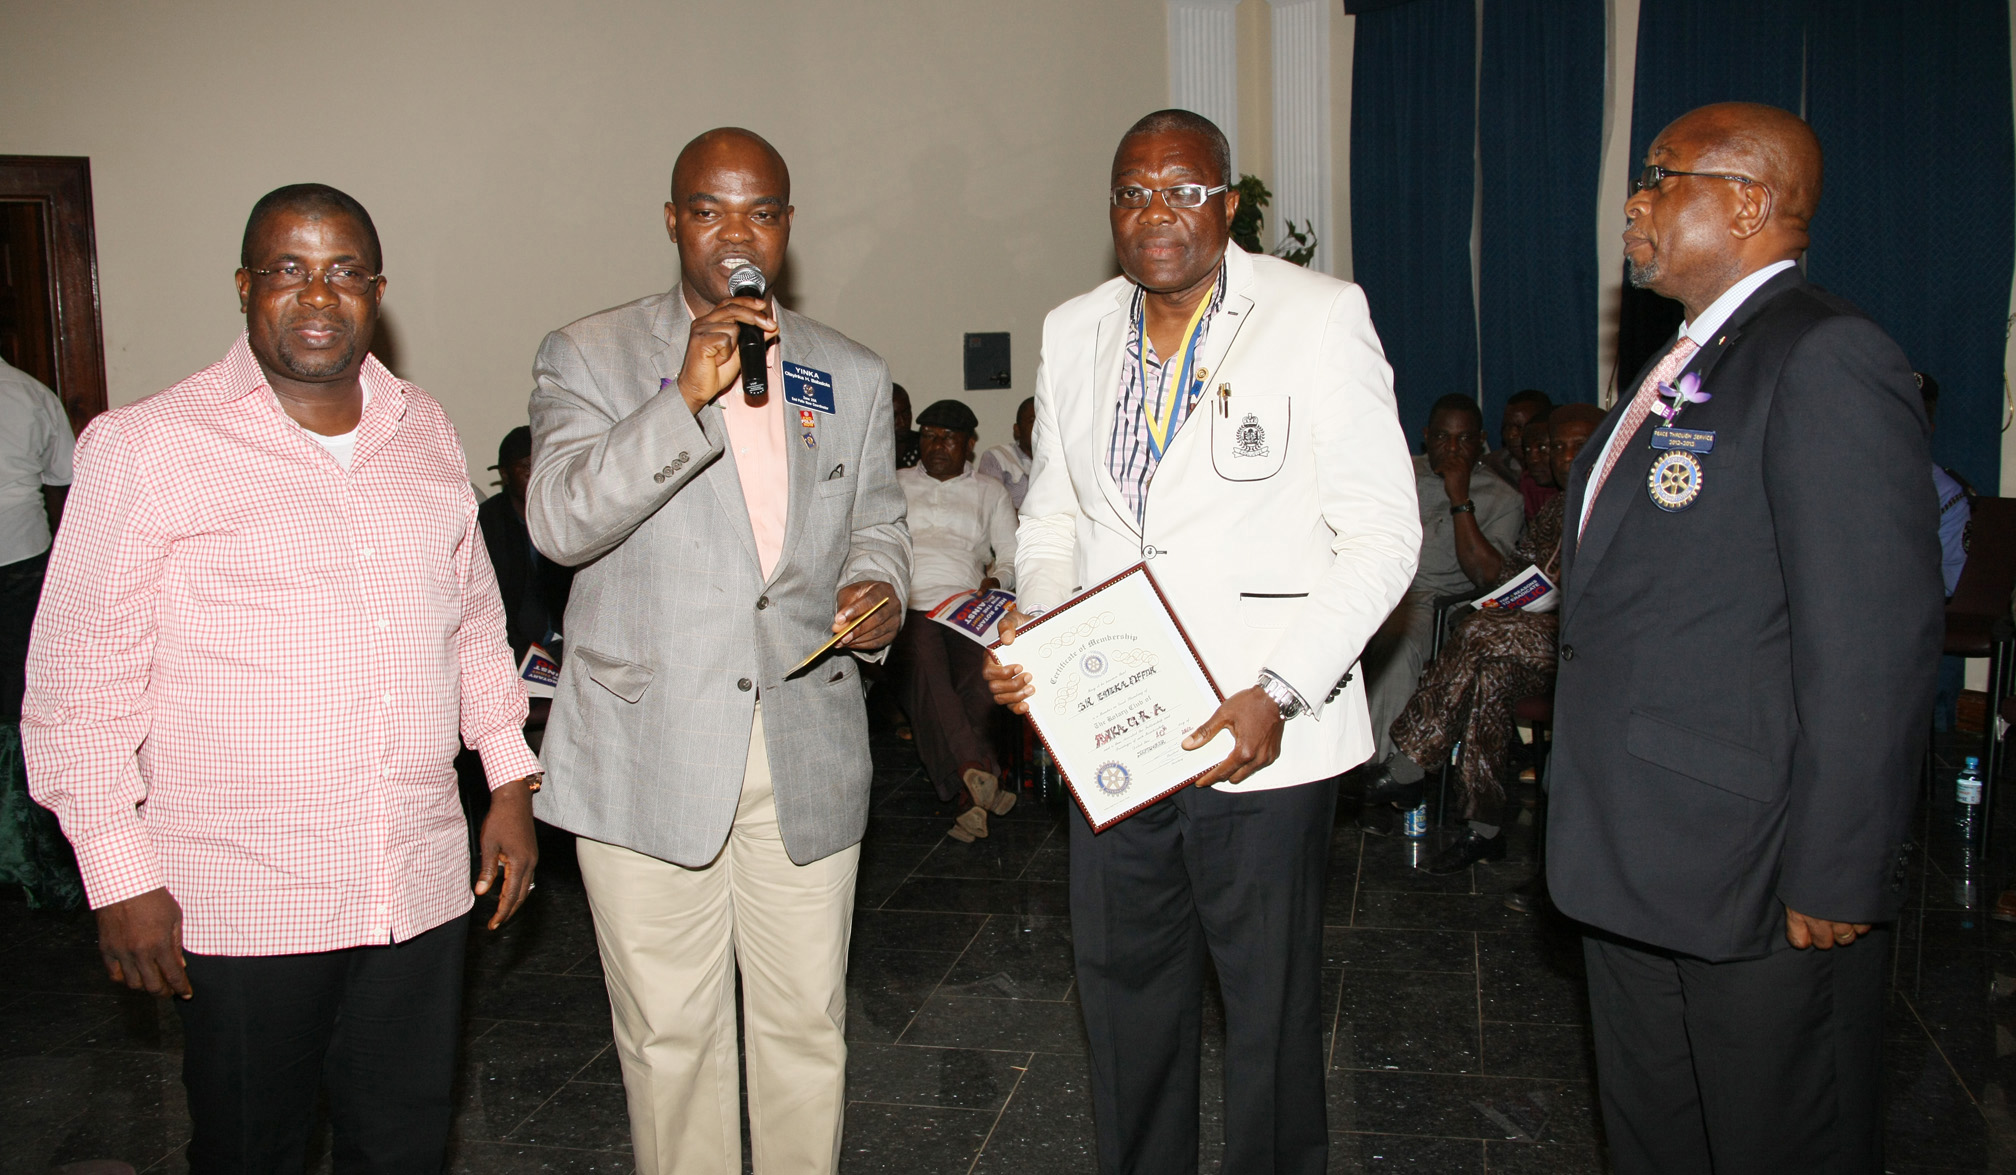 Sir Emeka Offor Recognized by Rotary International